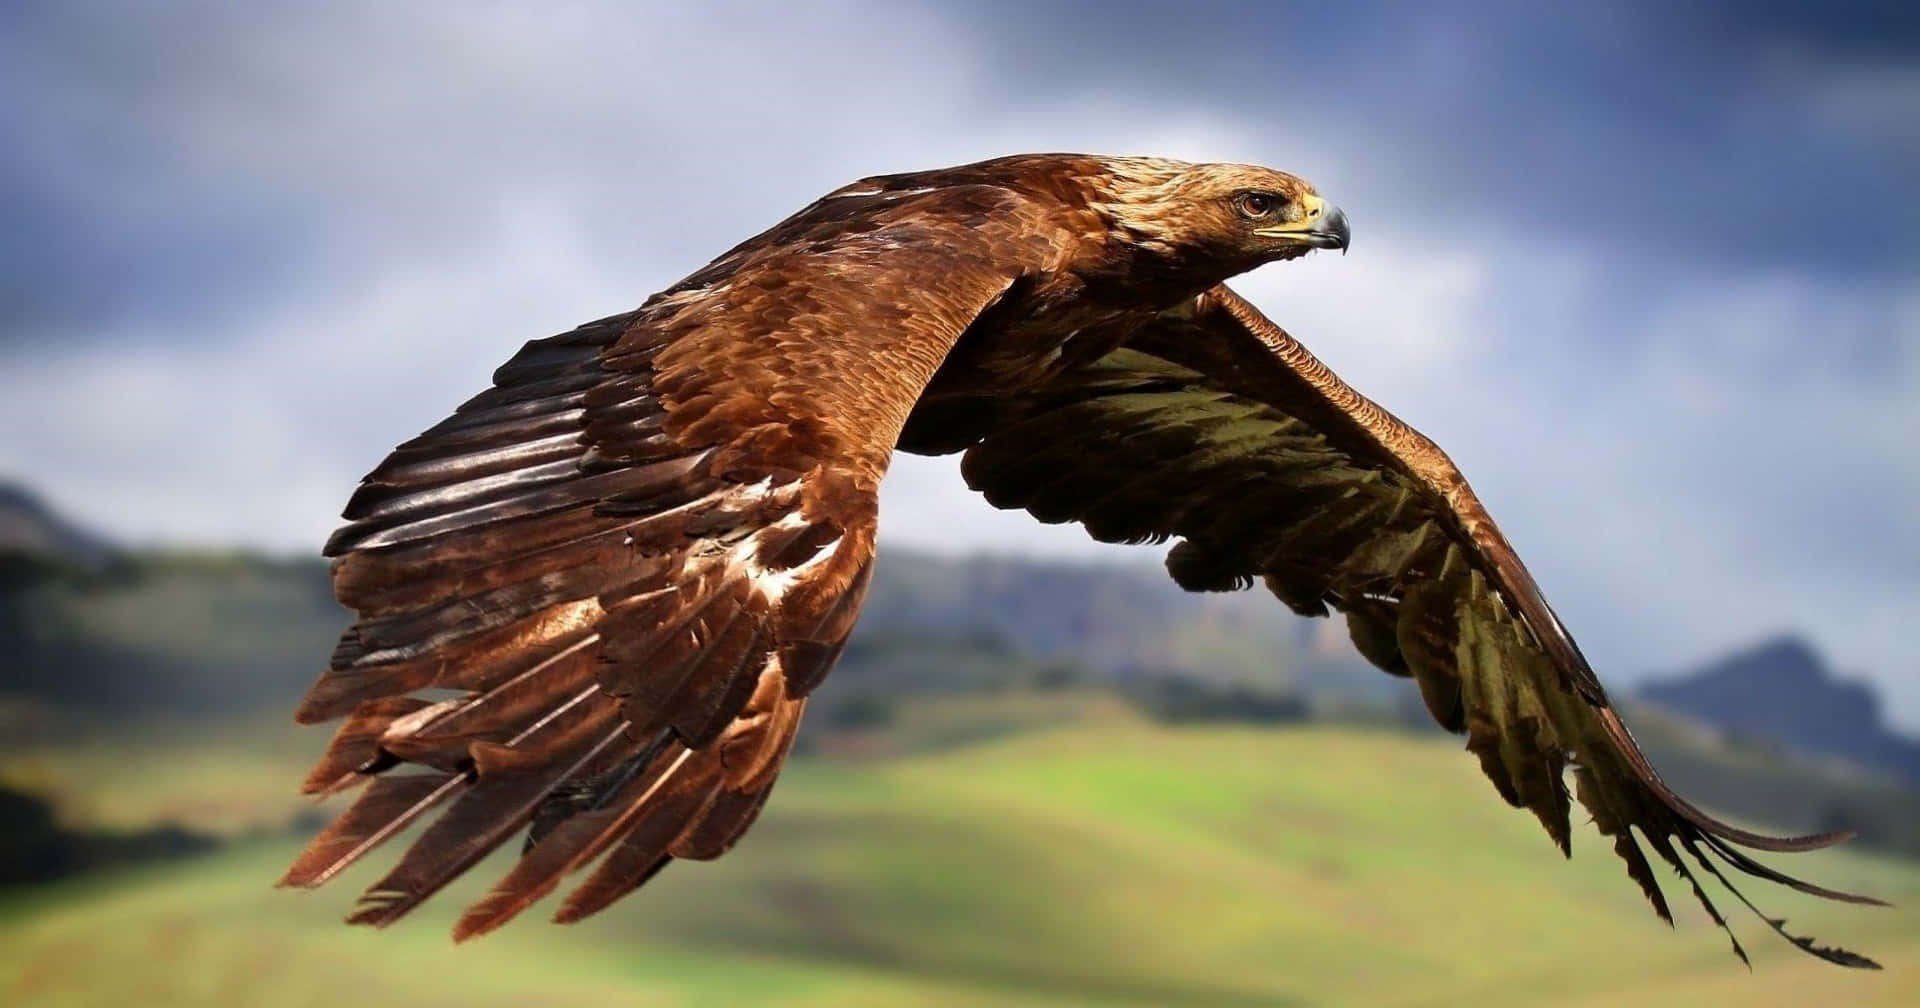 Majestic Golden Eagle Swooping Through the Sky